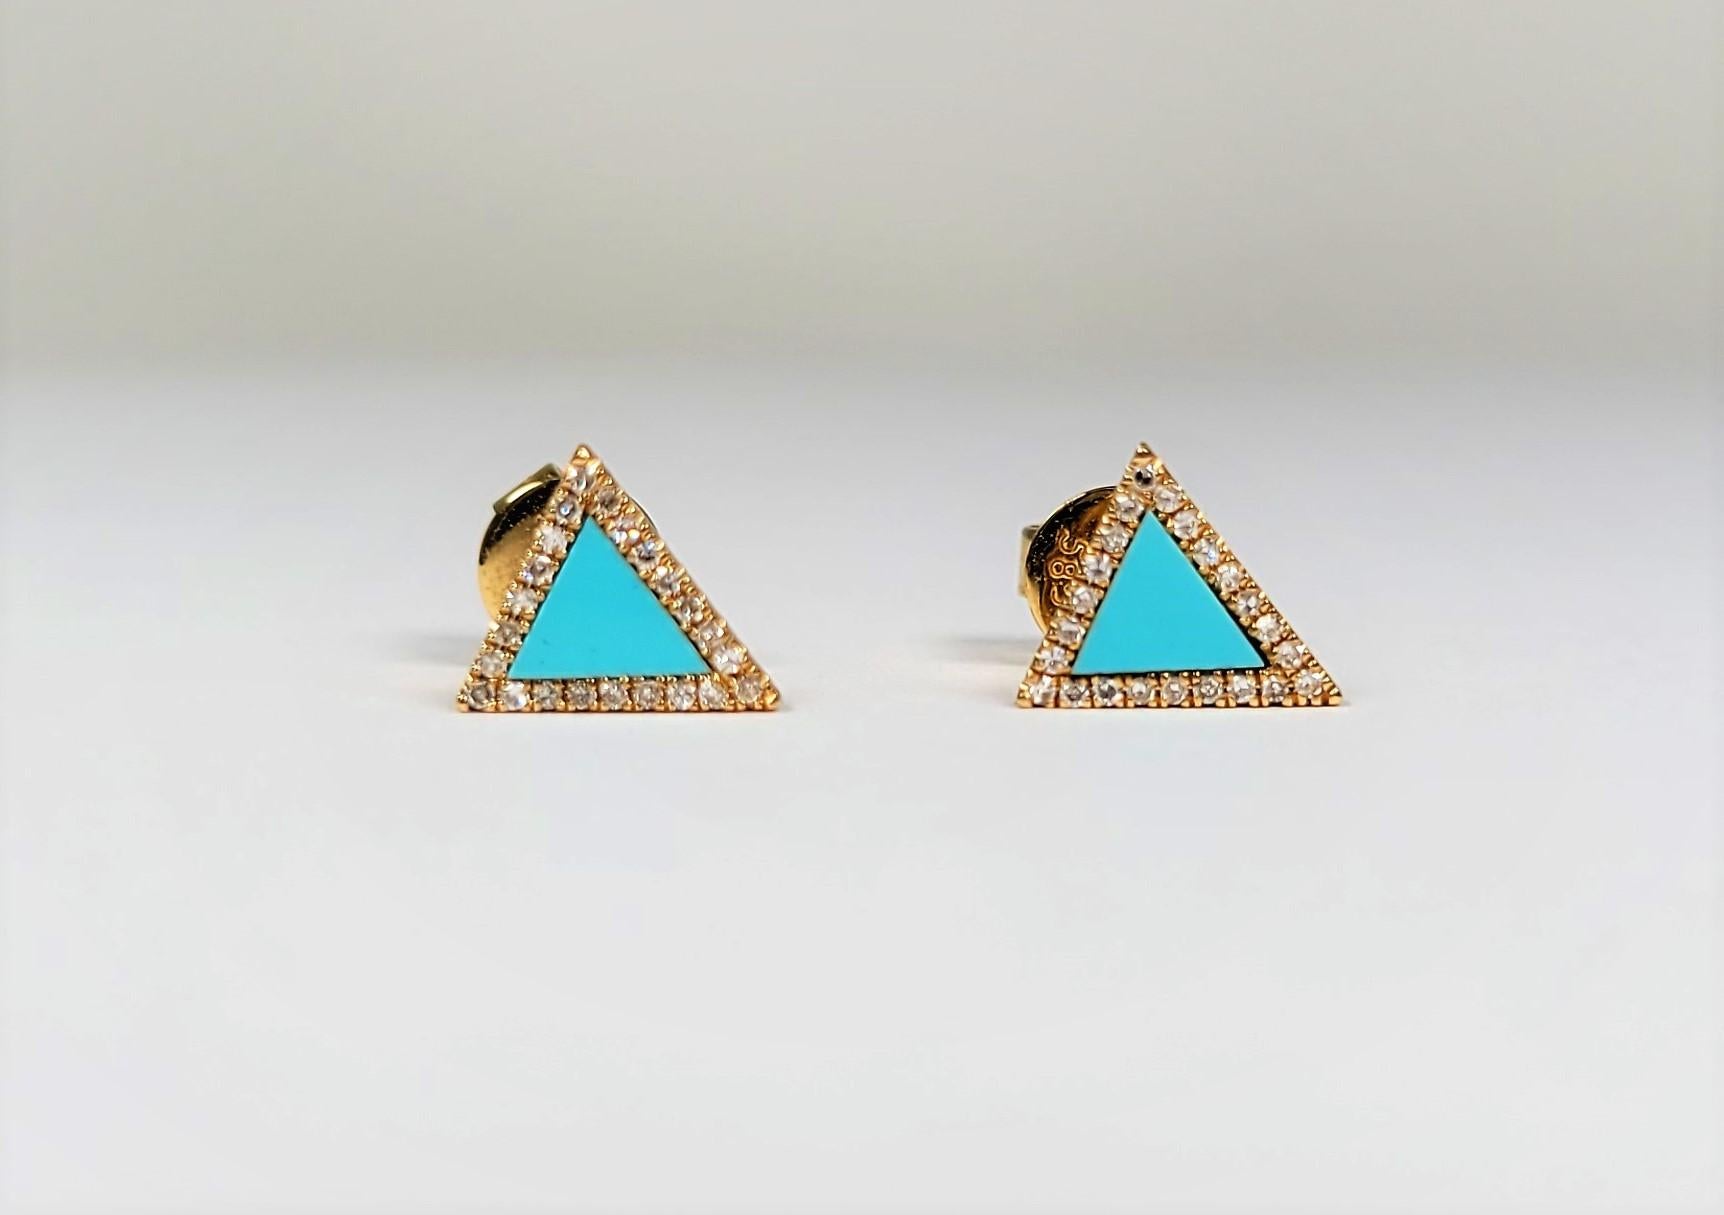 In 14 karat yellow gold, these triangle-shaped turquoise and diamond earrings are light and comfy!  